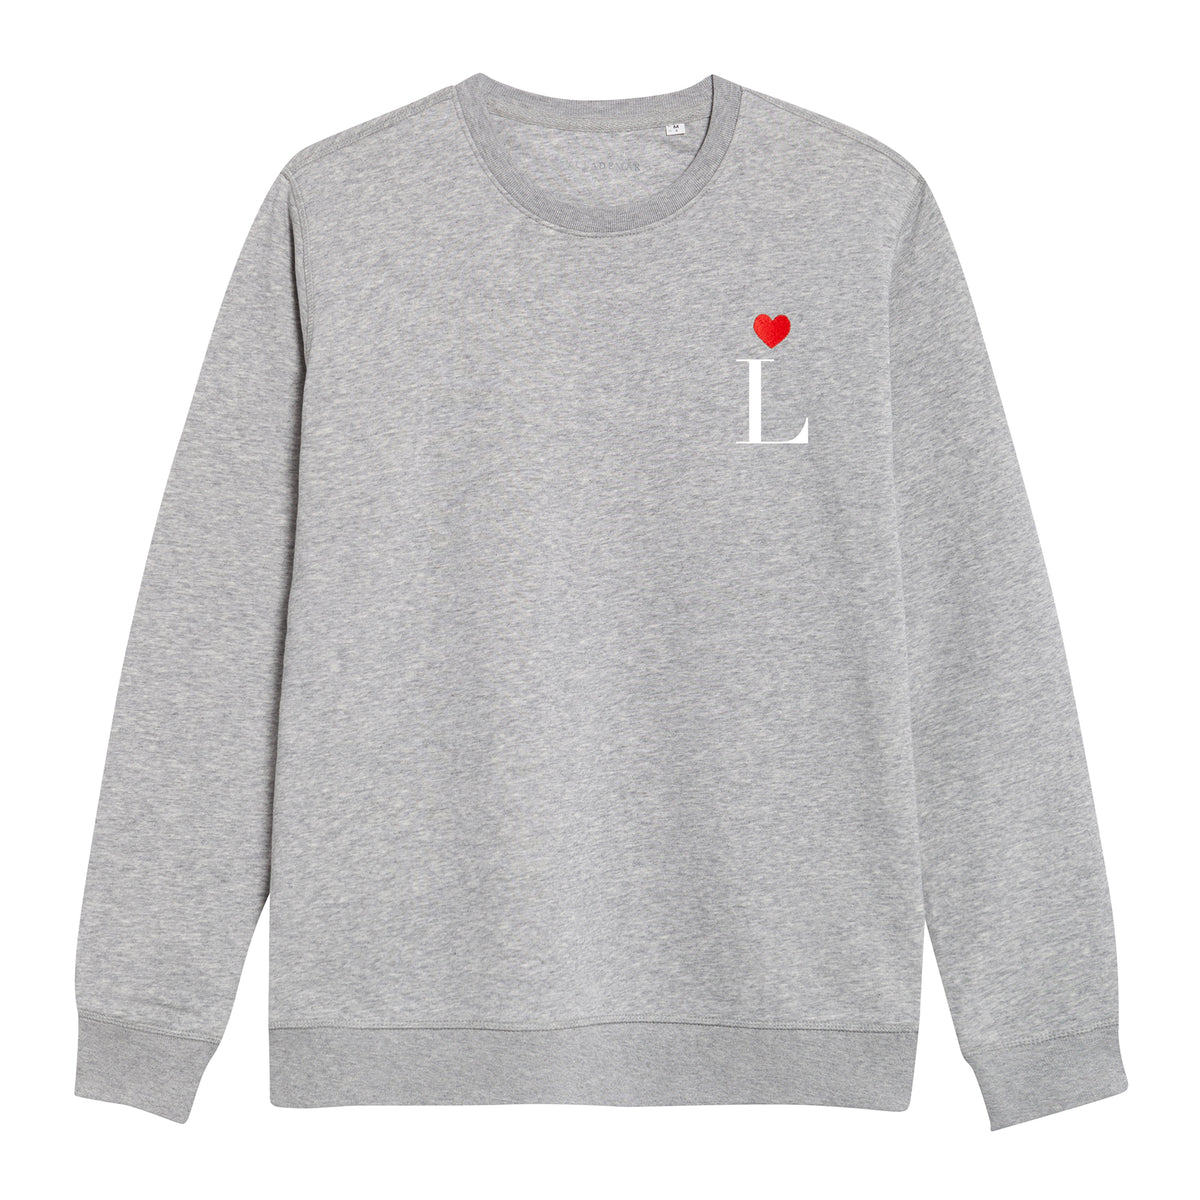 Personalized Heart Embroidered Grey Sweatshirt